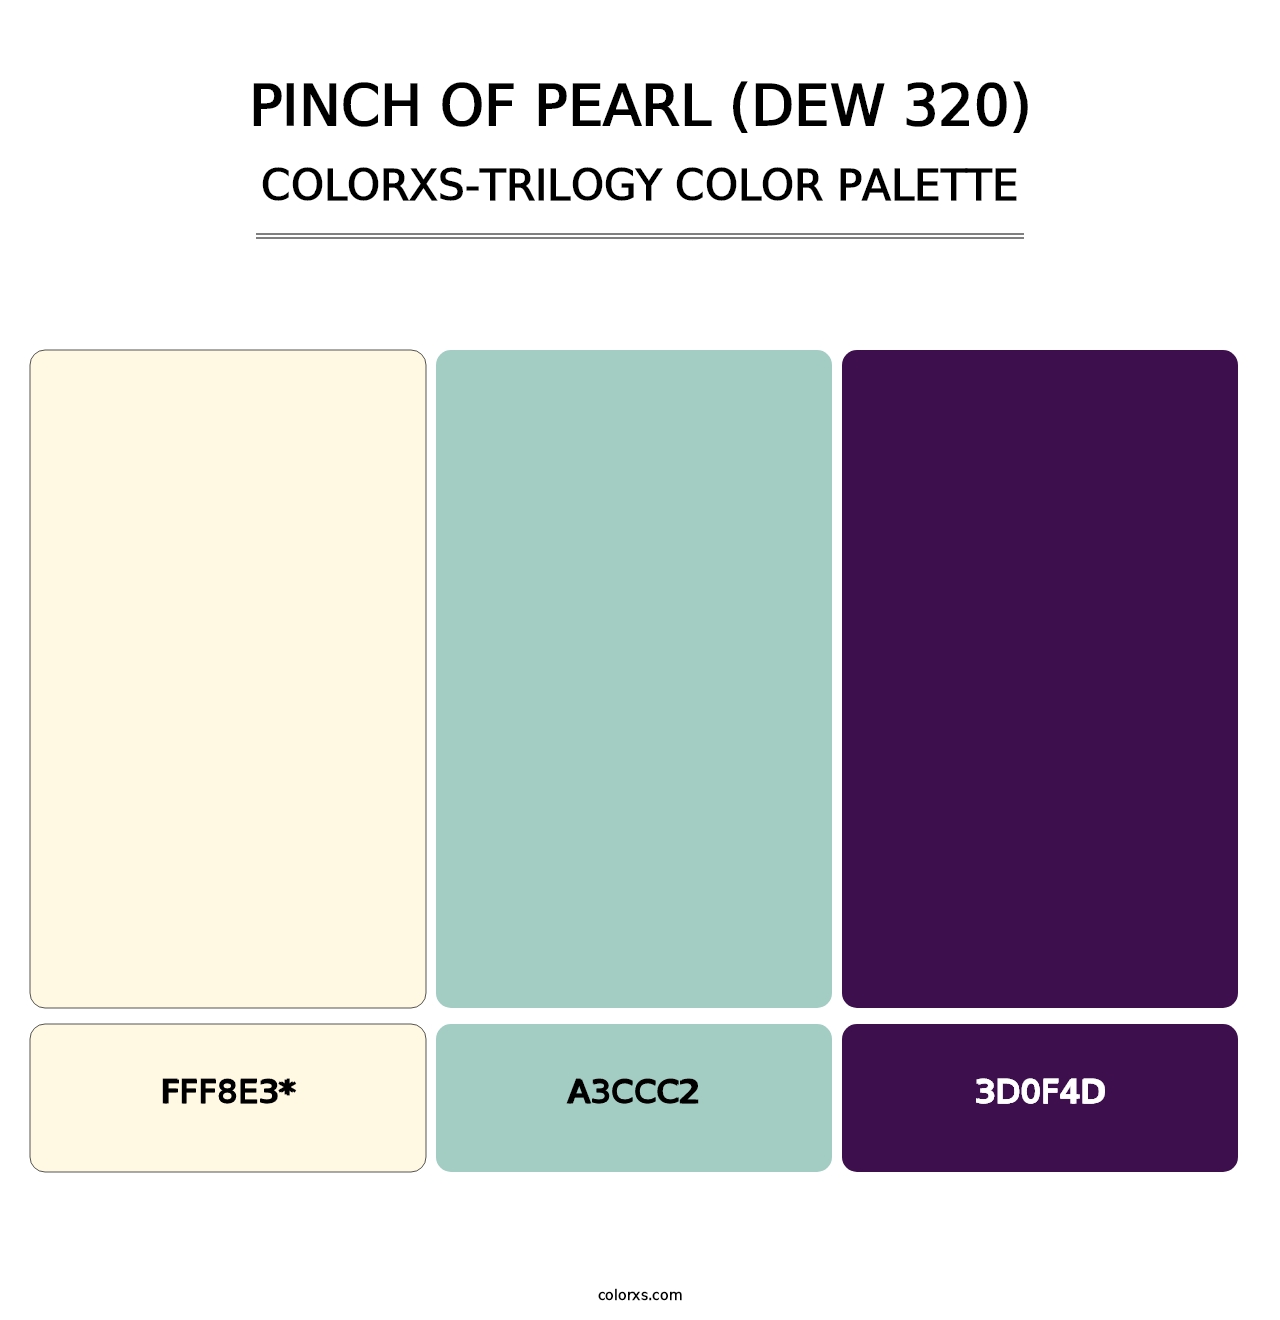 Pinch of Pearl (DEW 320) - Colorxs Trilogy Palette